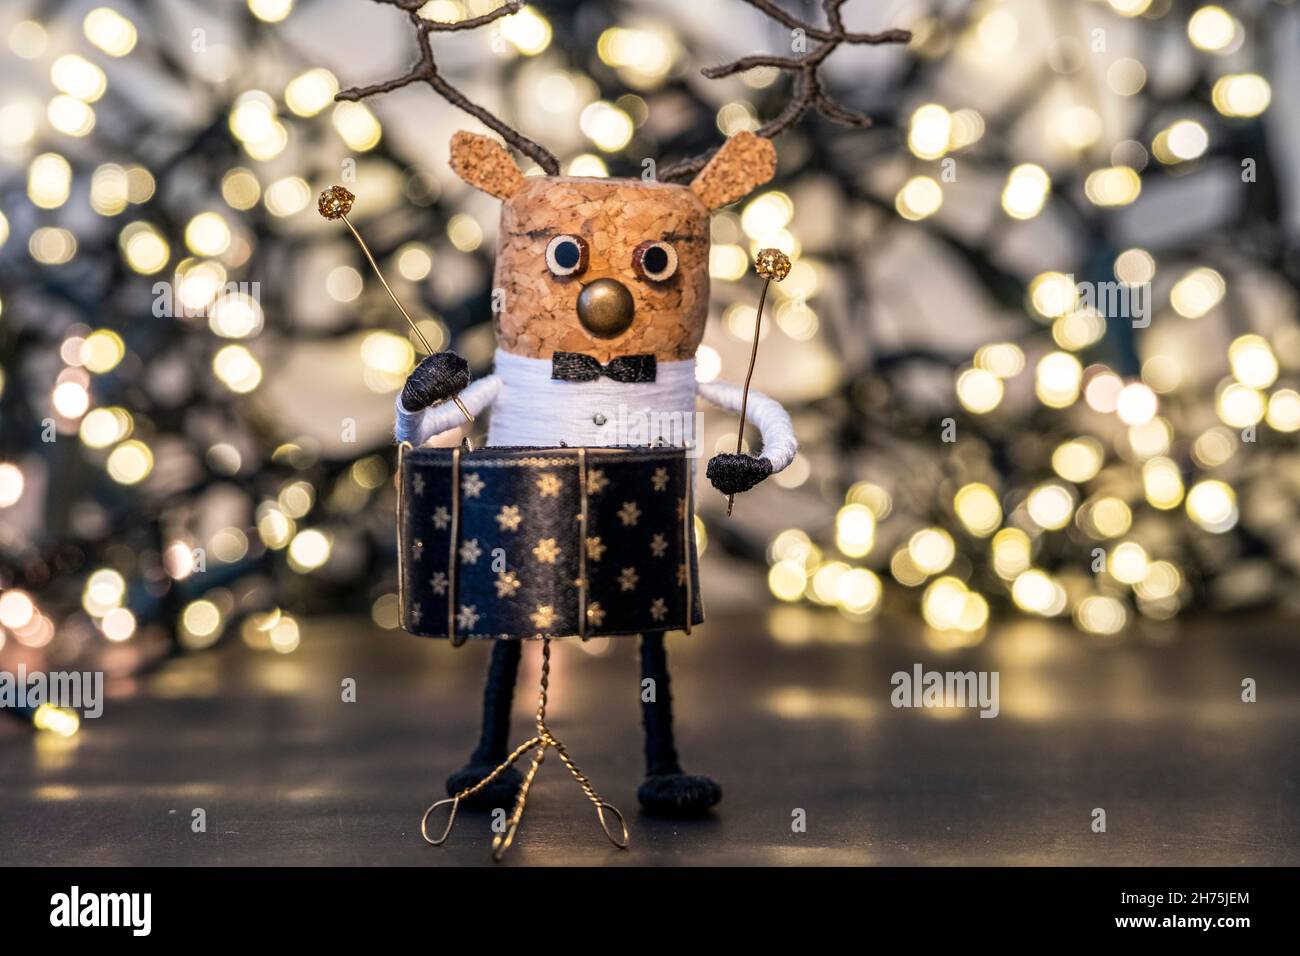 Creative Christmas Concept Christmas lights with drumming cork deer, nostalgic Christmas ornament with gold tones Stock Photo